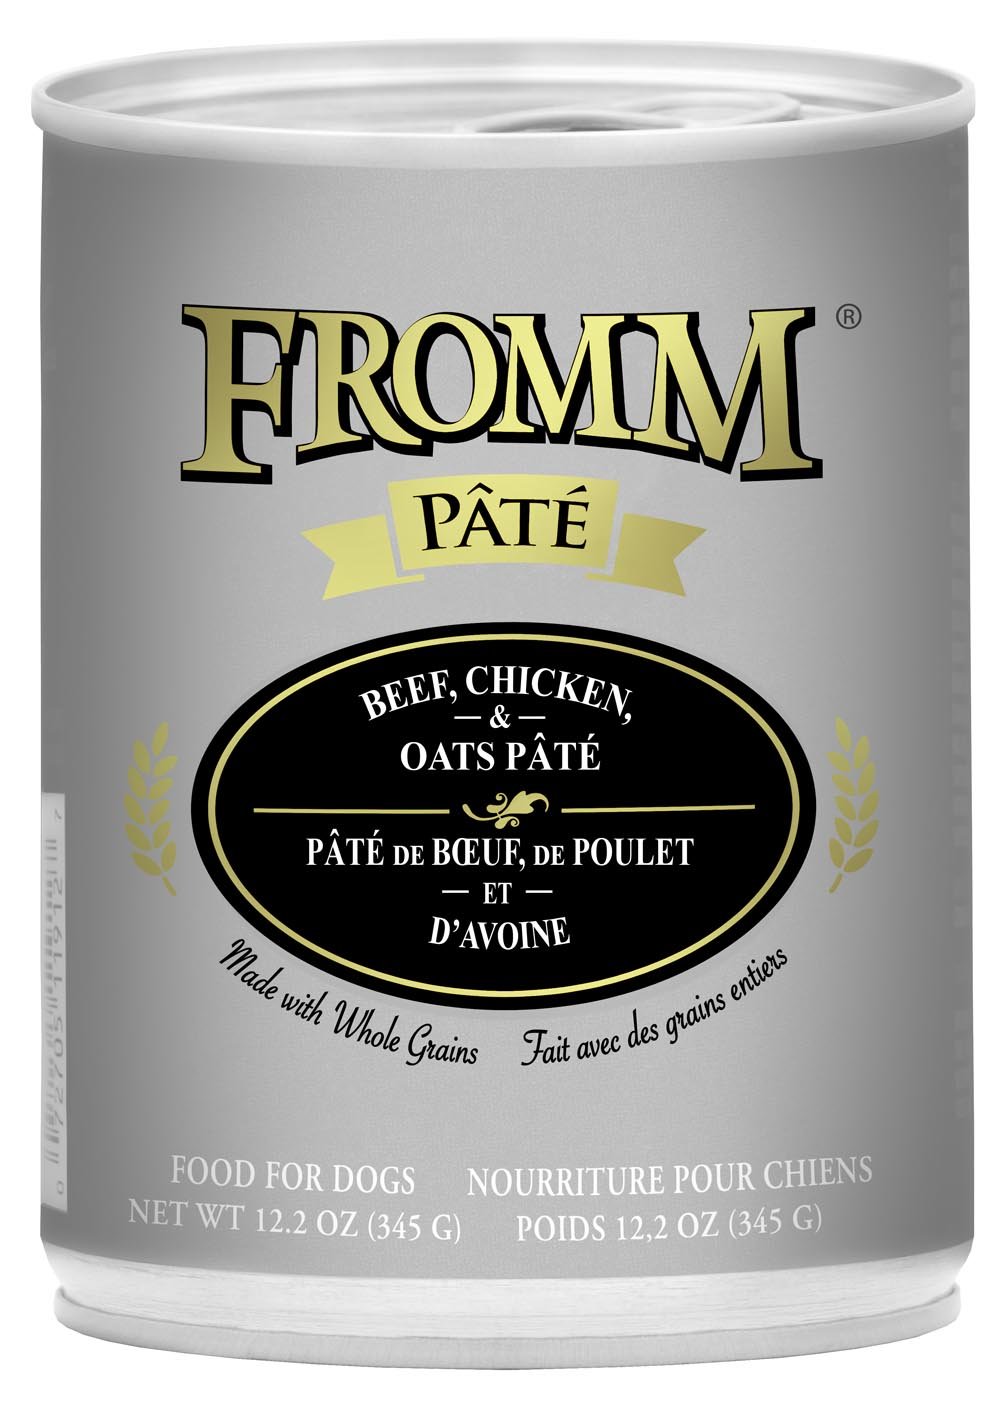 Fromm Pate Beef/Chkn/Oats 12.2oz Dog